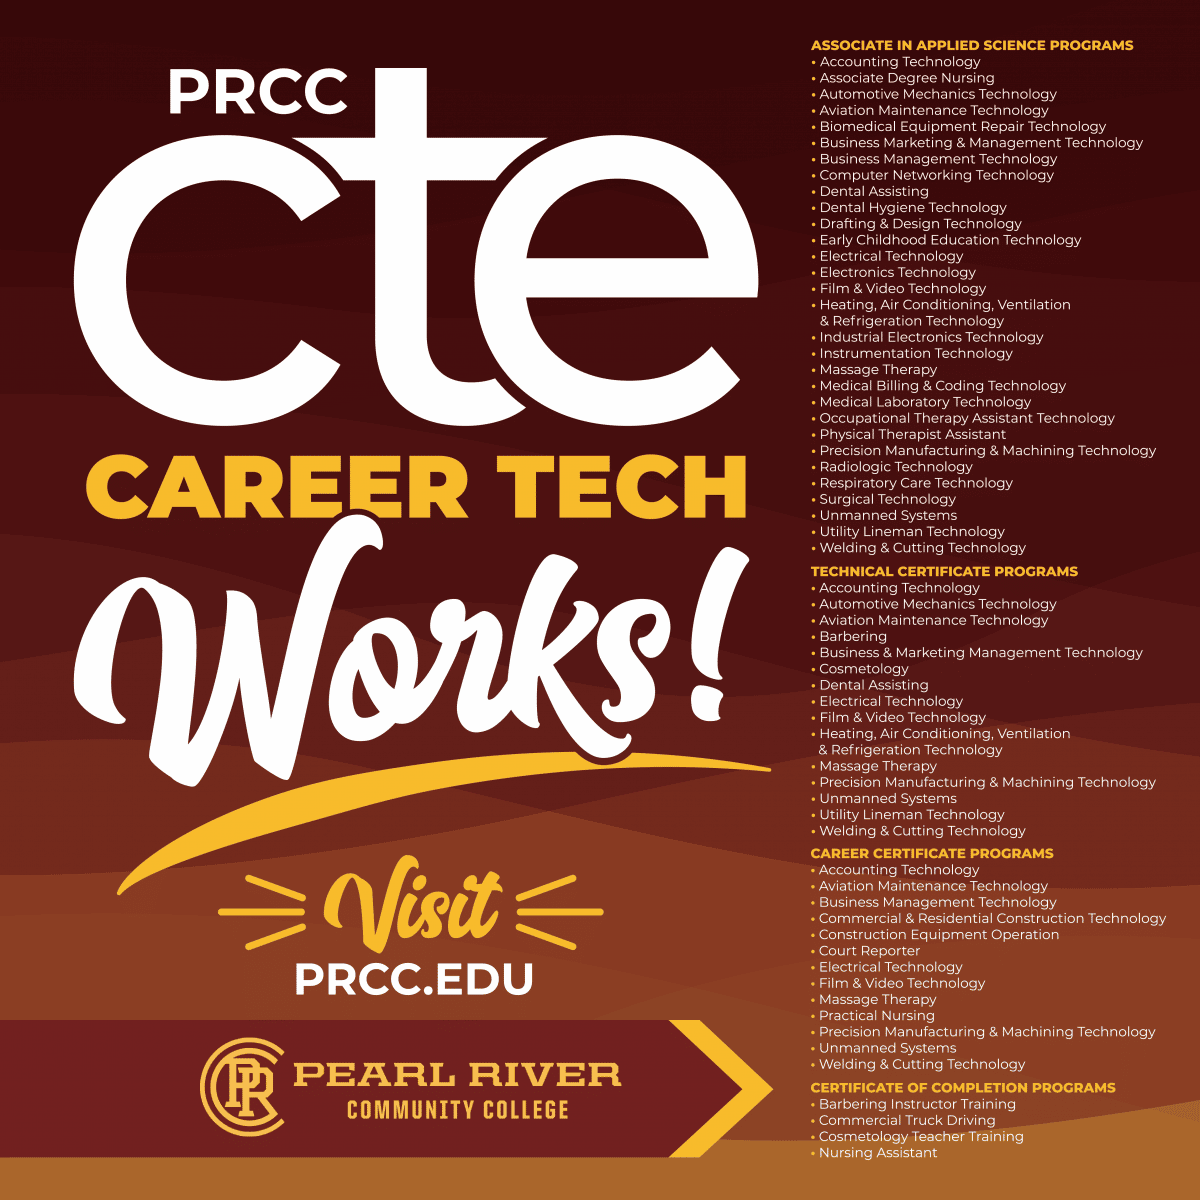 List of all Career Tech Programs at PRCC as of July 2021